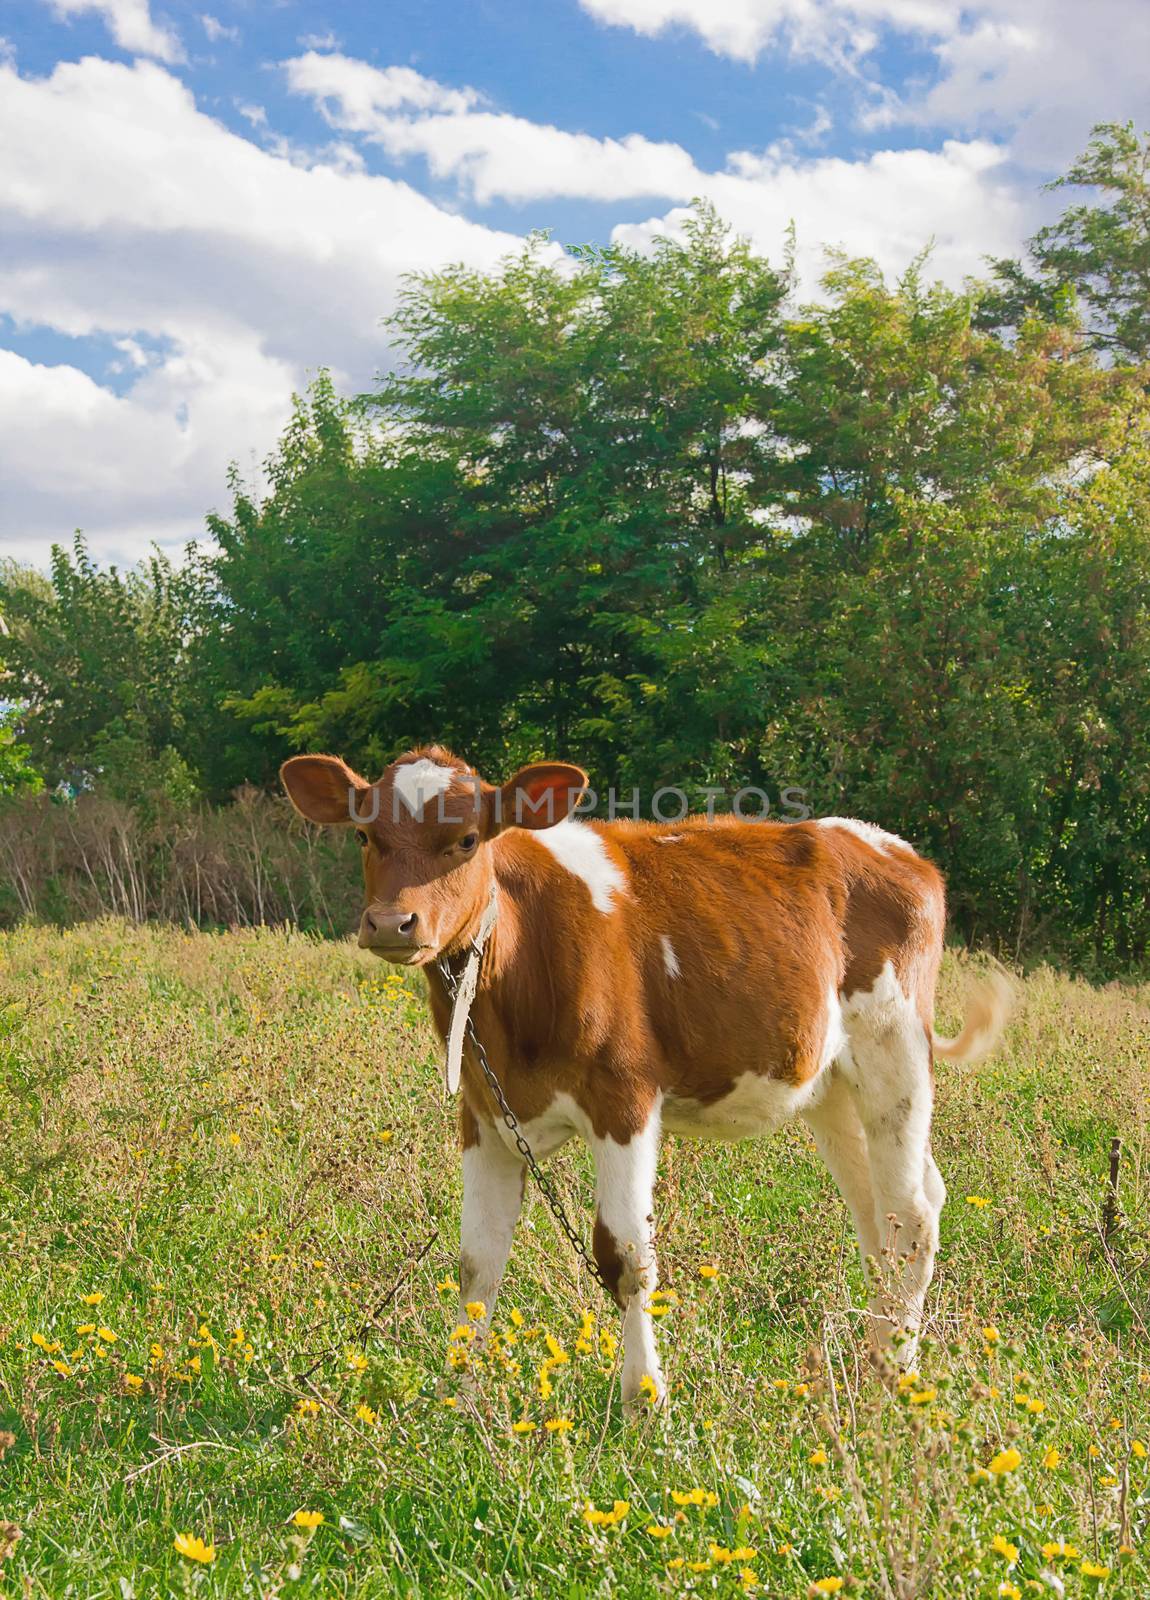 Calf brown spotted outdoors in the summer against the backdrop of greenery